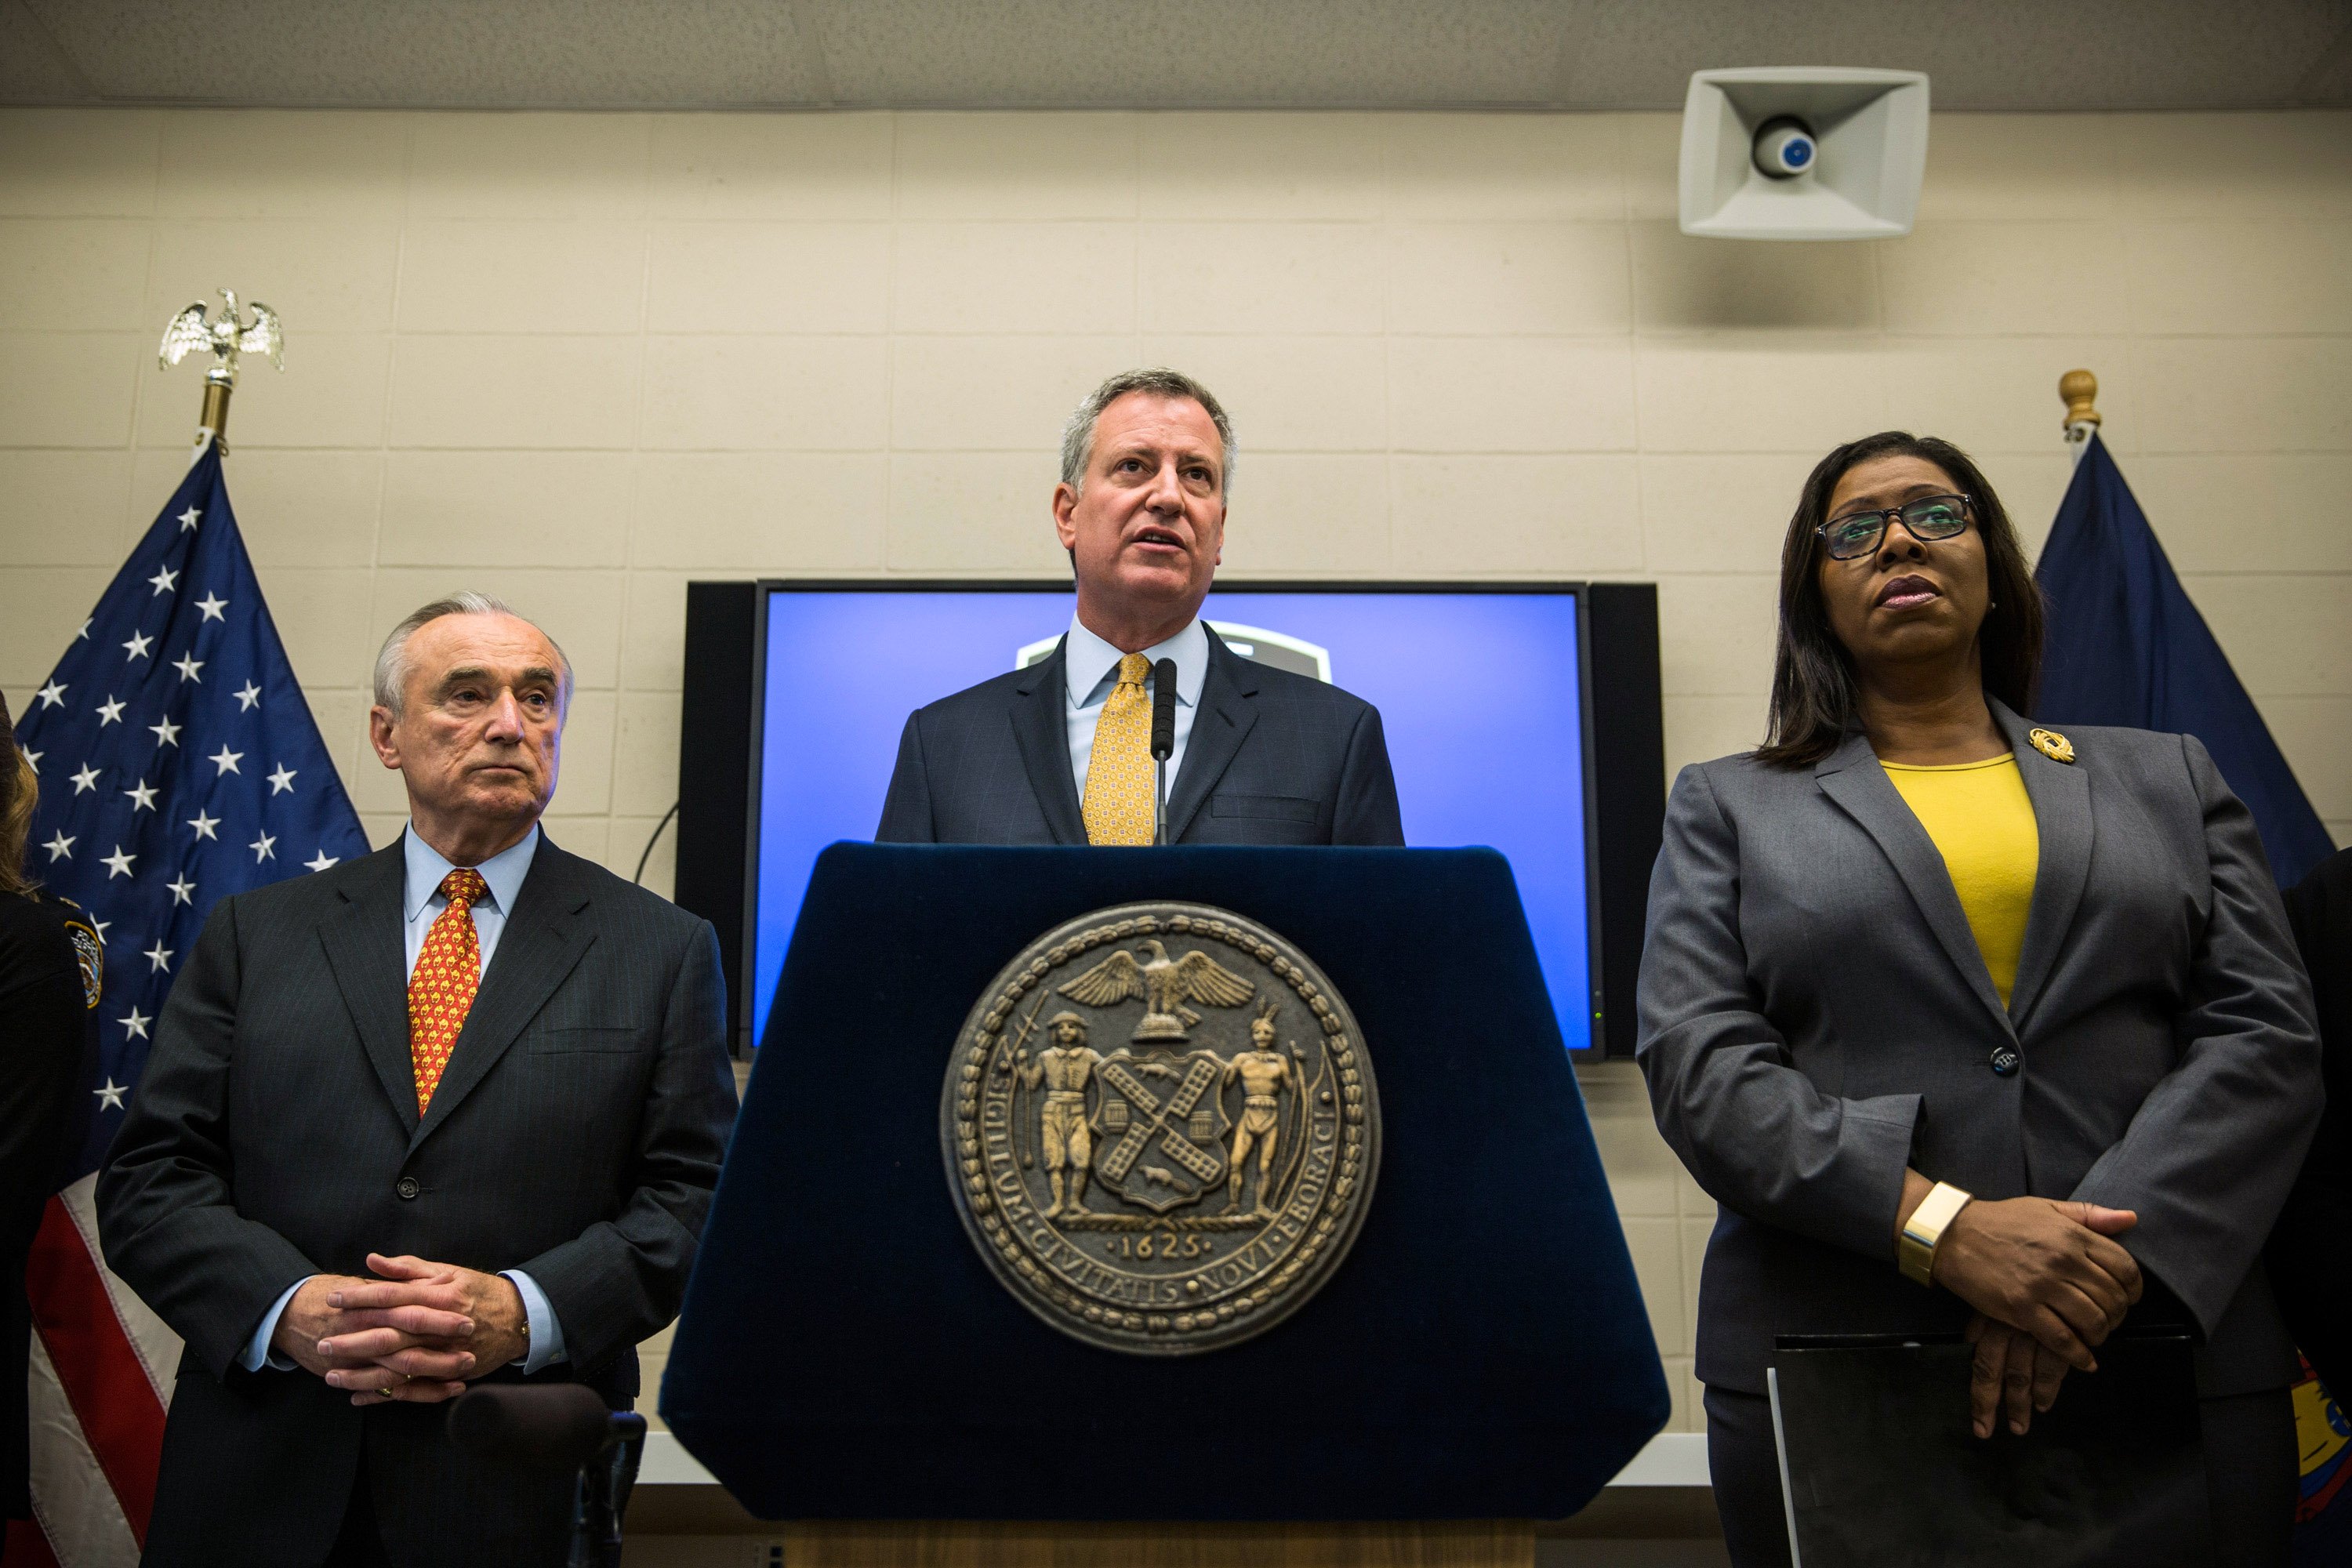 New York Police Department (NYPD) Commisioner Bill Bratton (L) and New York City Mayor Bill de Blasio speak about body cameras that the NYPD will begin using during a press conference on December 3, 2014 in New York City. (Andrew Burton—Getty Images)